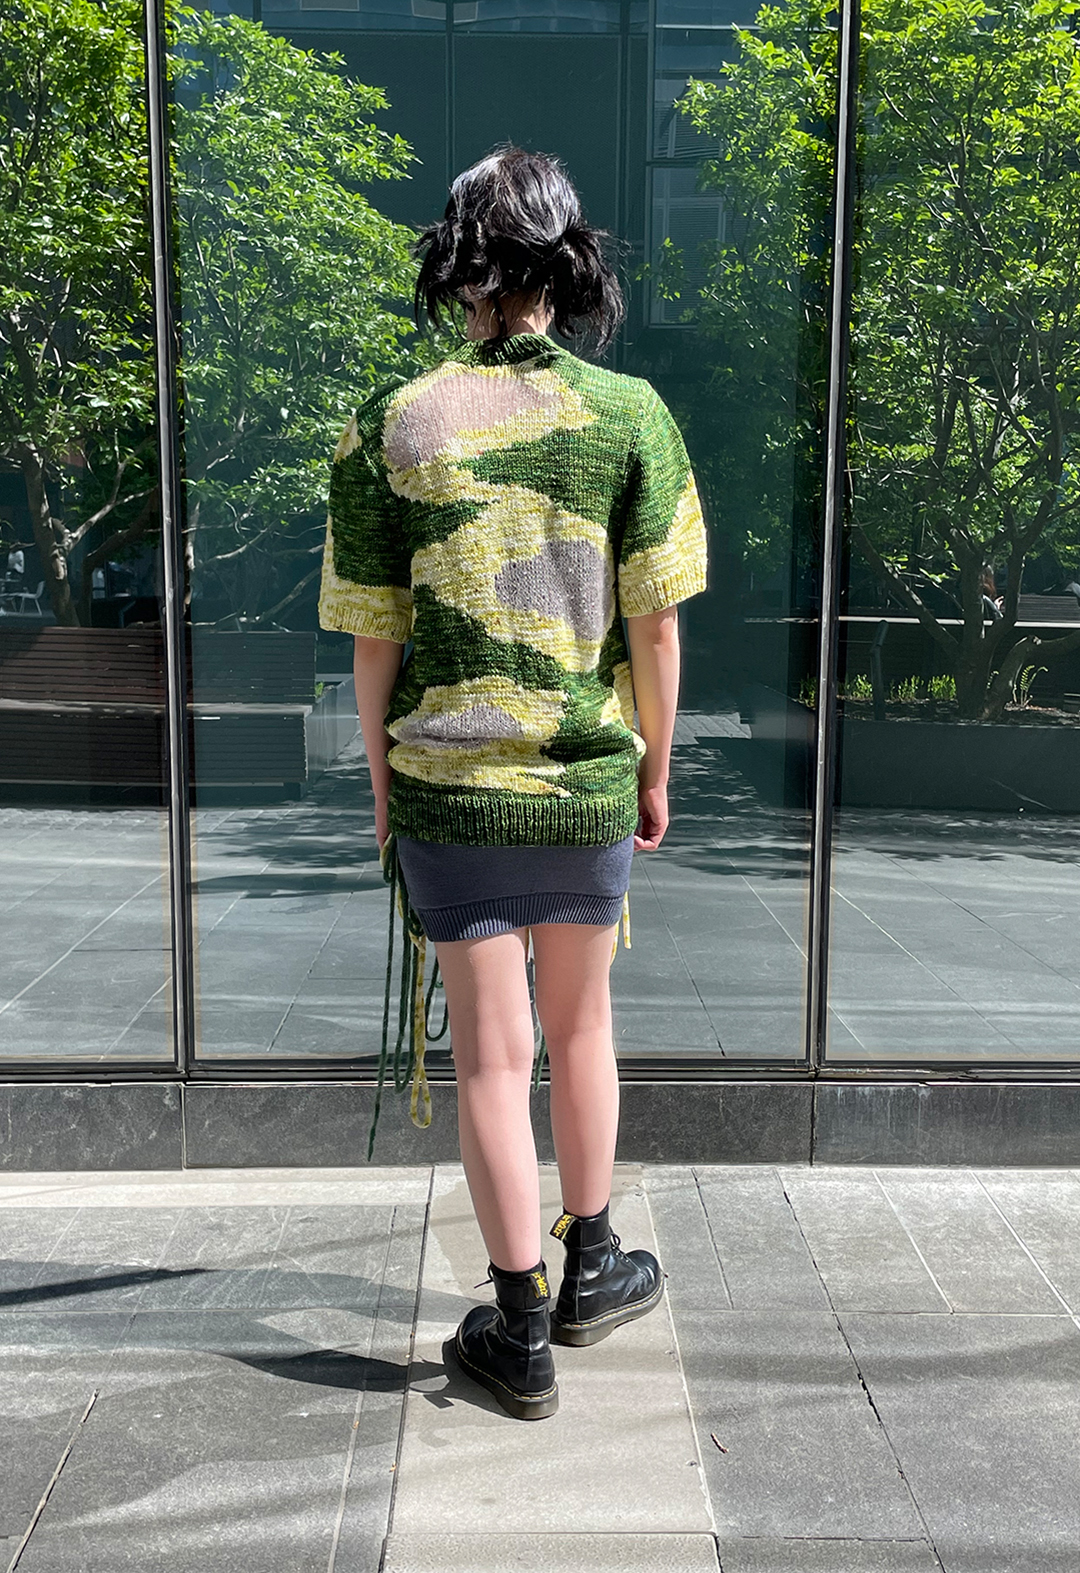 Back view of a model wearing a hand knit short sleeved intarsia sweater. There is a glass building in the background with reflection of trees.